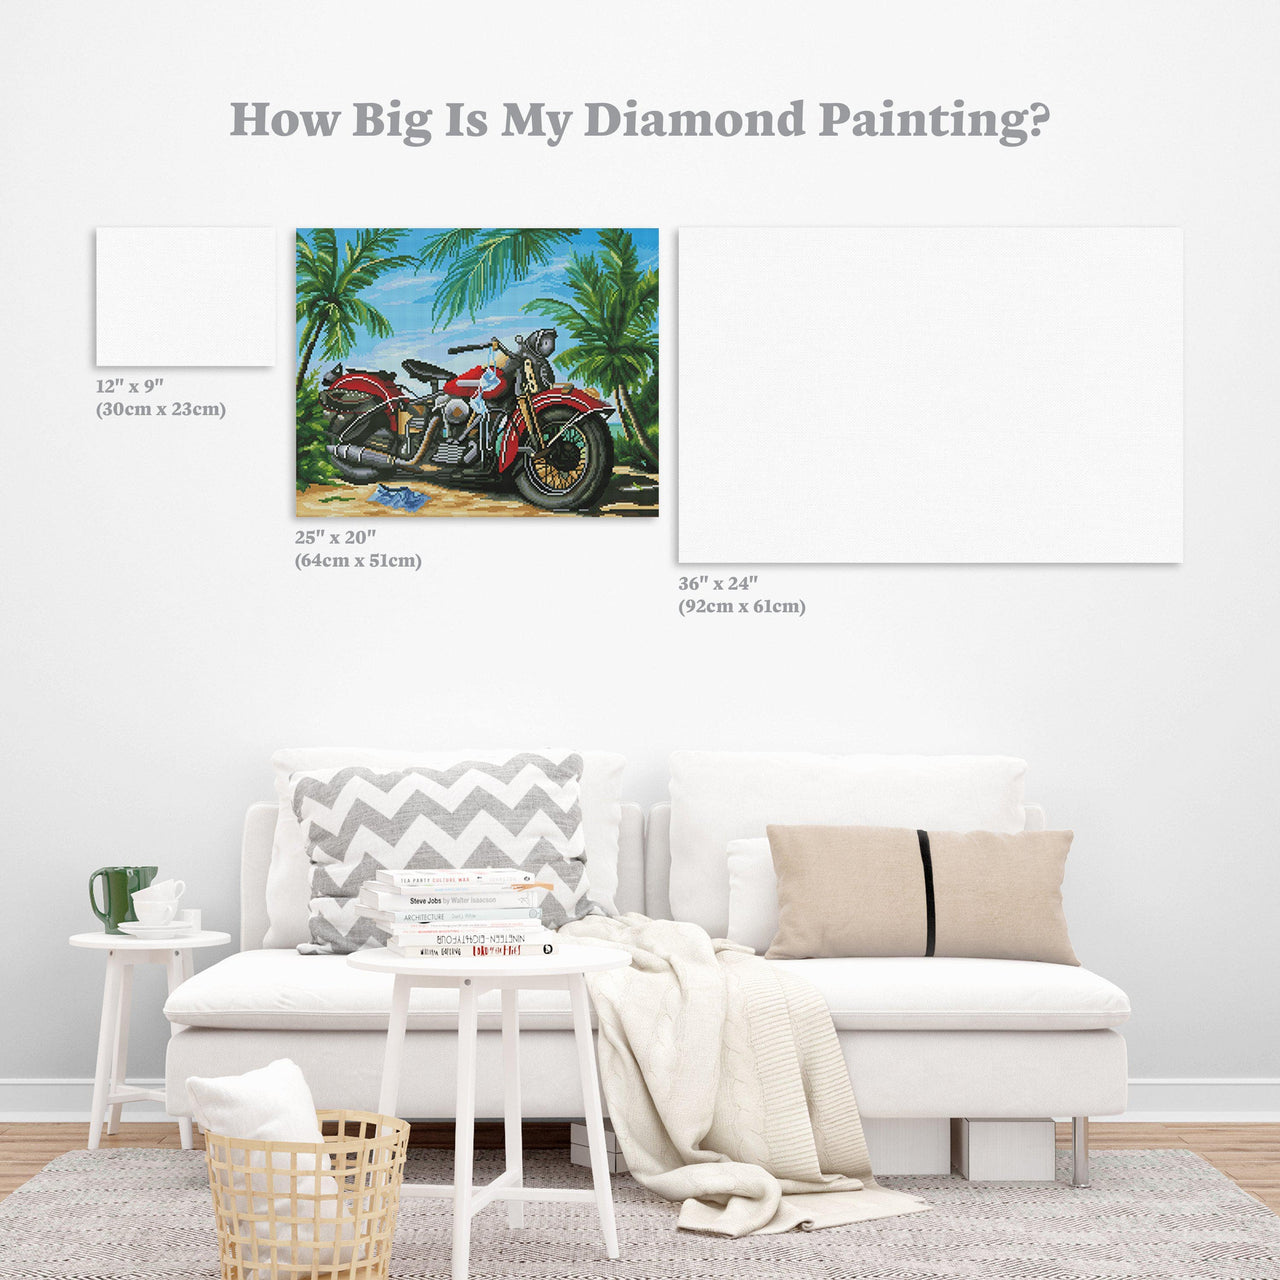 Diamond Painting Quick Dip 20" x 25″ (51cm x 64cm) / Round with 44 Colors including 4 ABs / 41,086